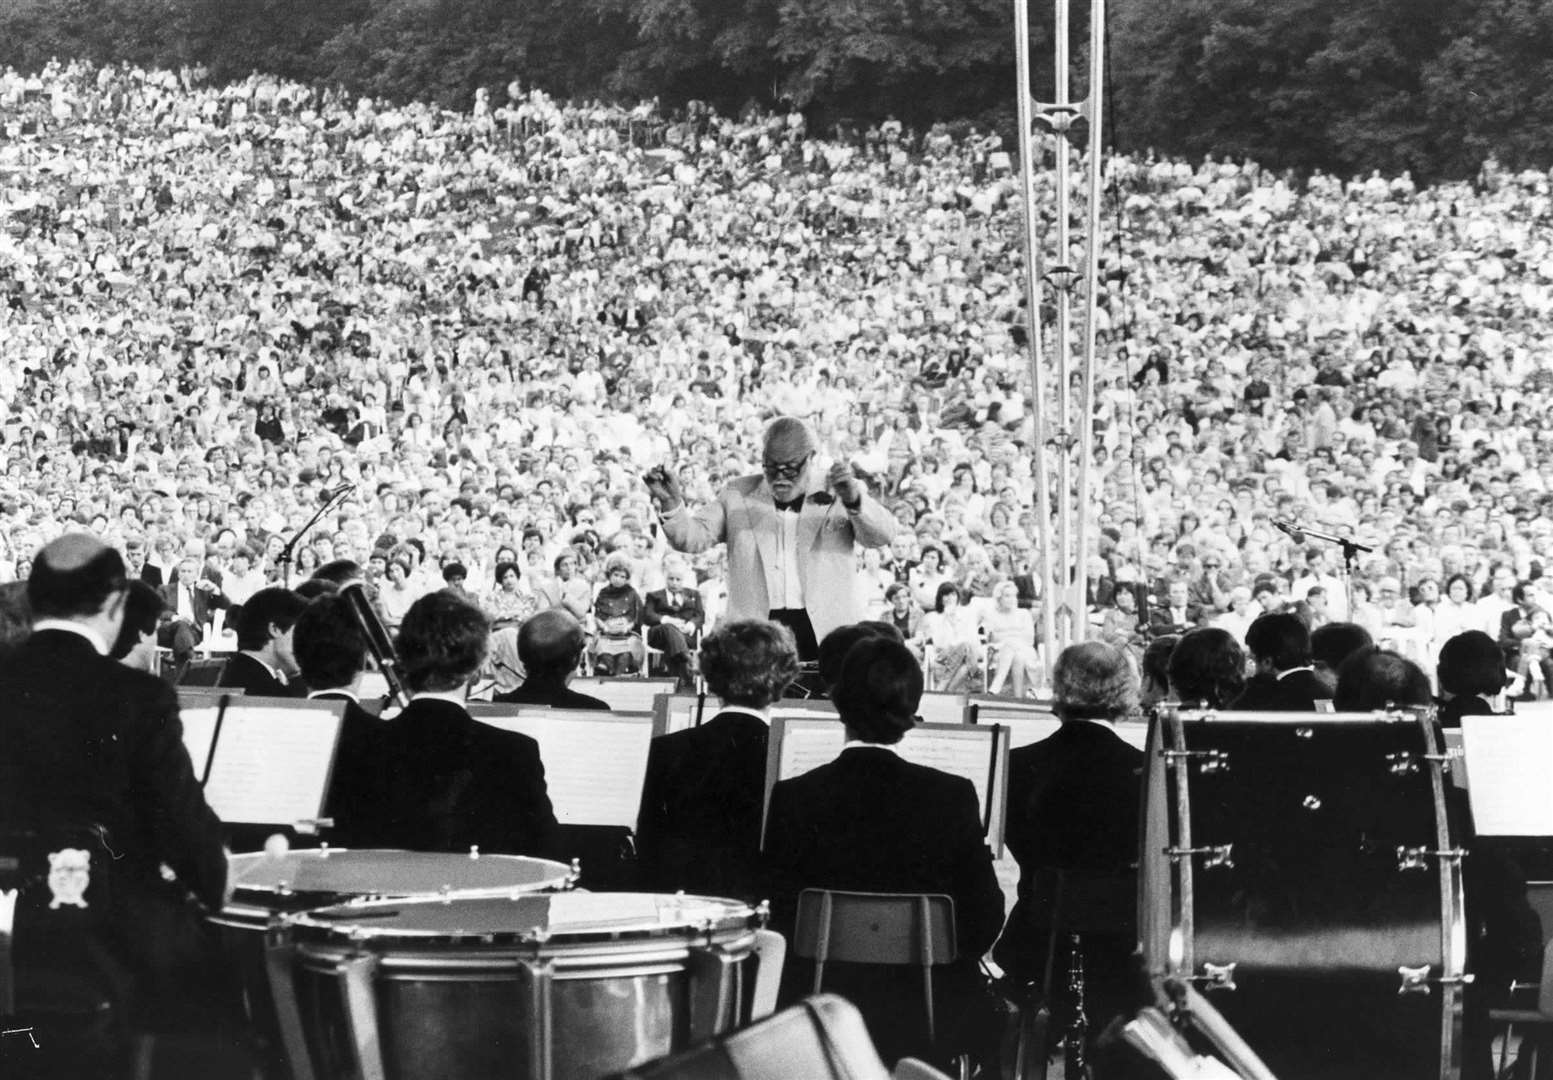 Quite the crowd for an orchestral open-air concert at Leeds Castle in August 1982